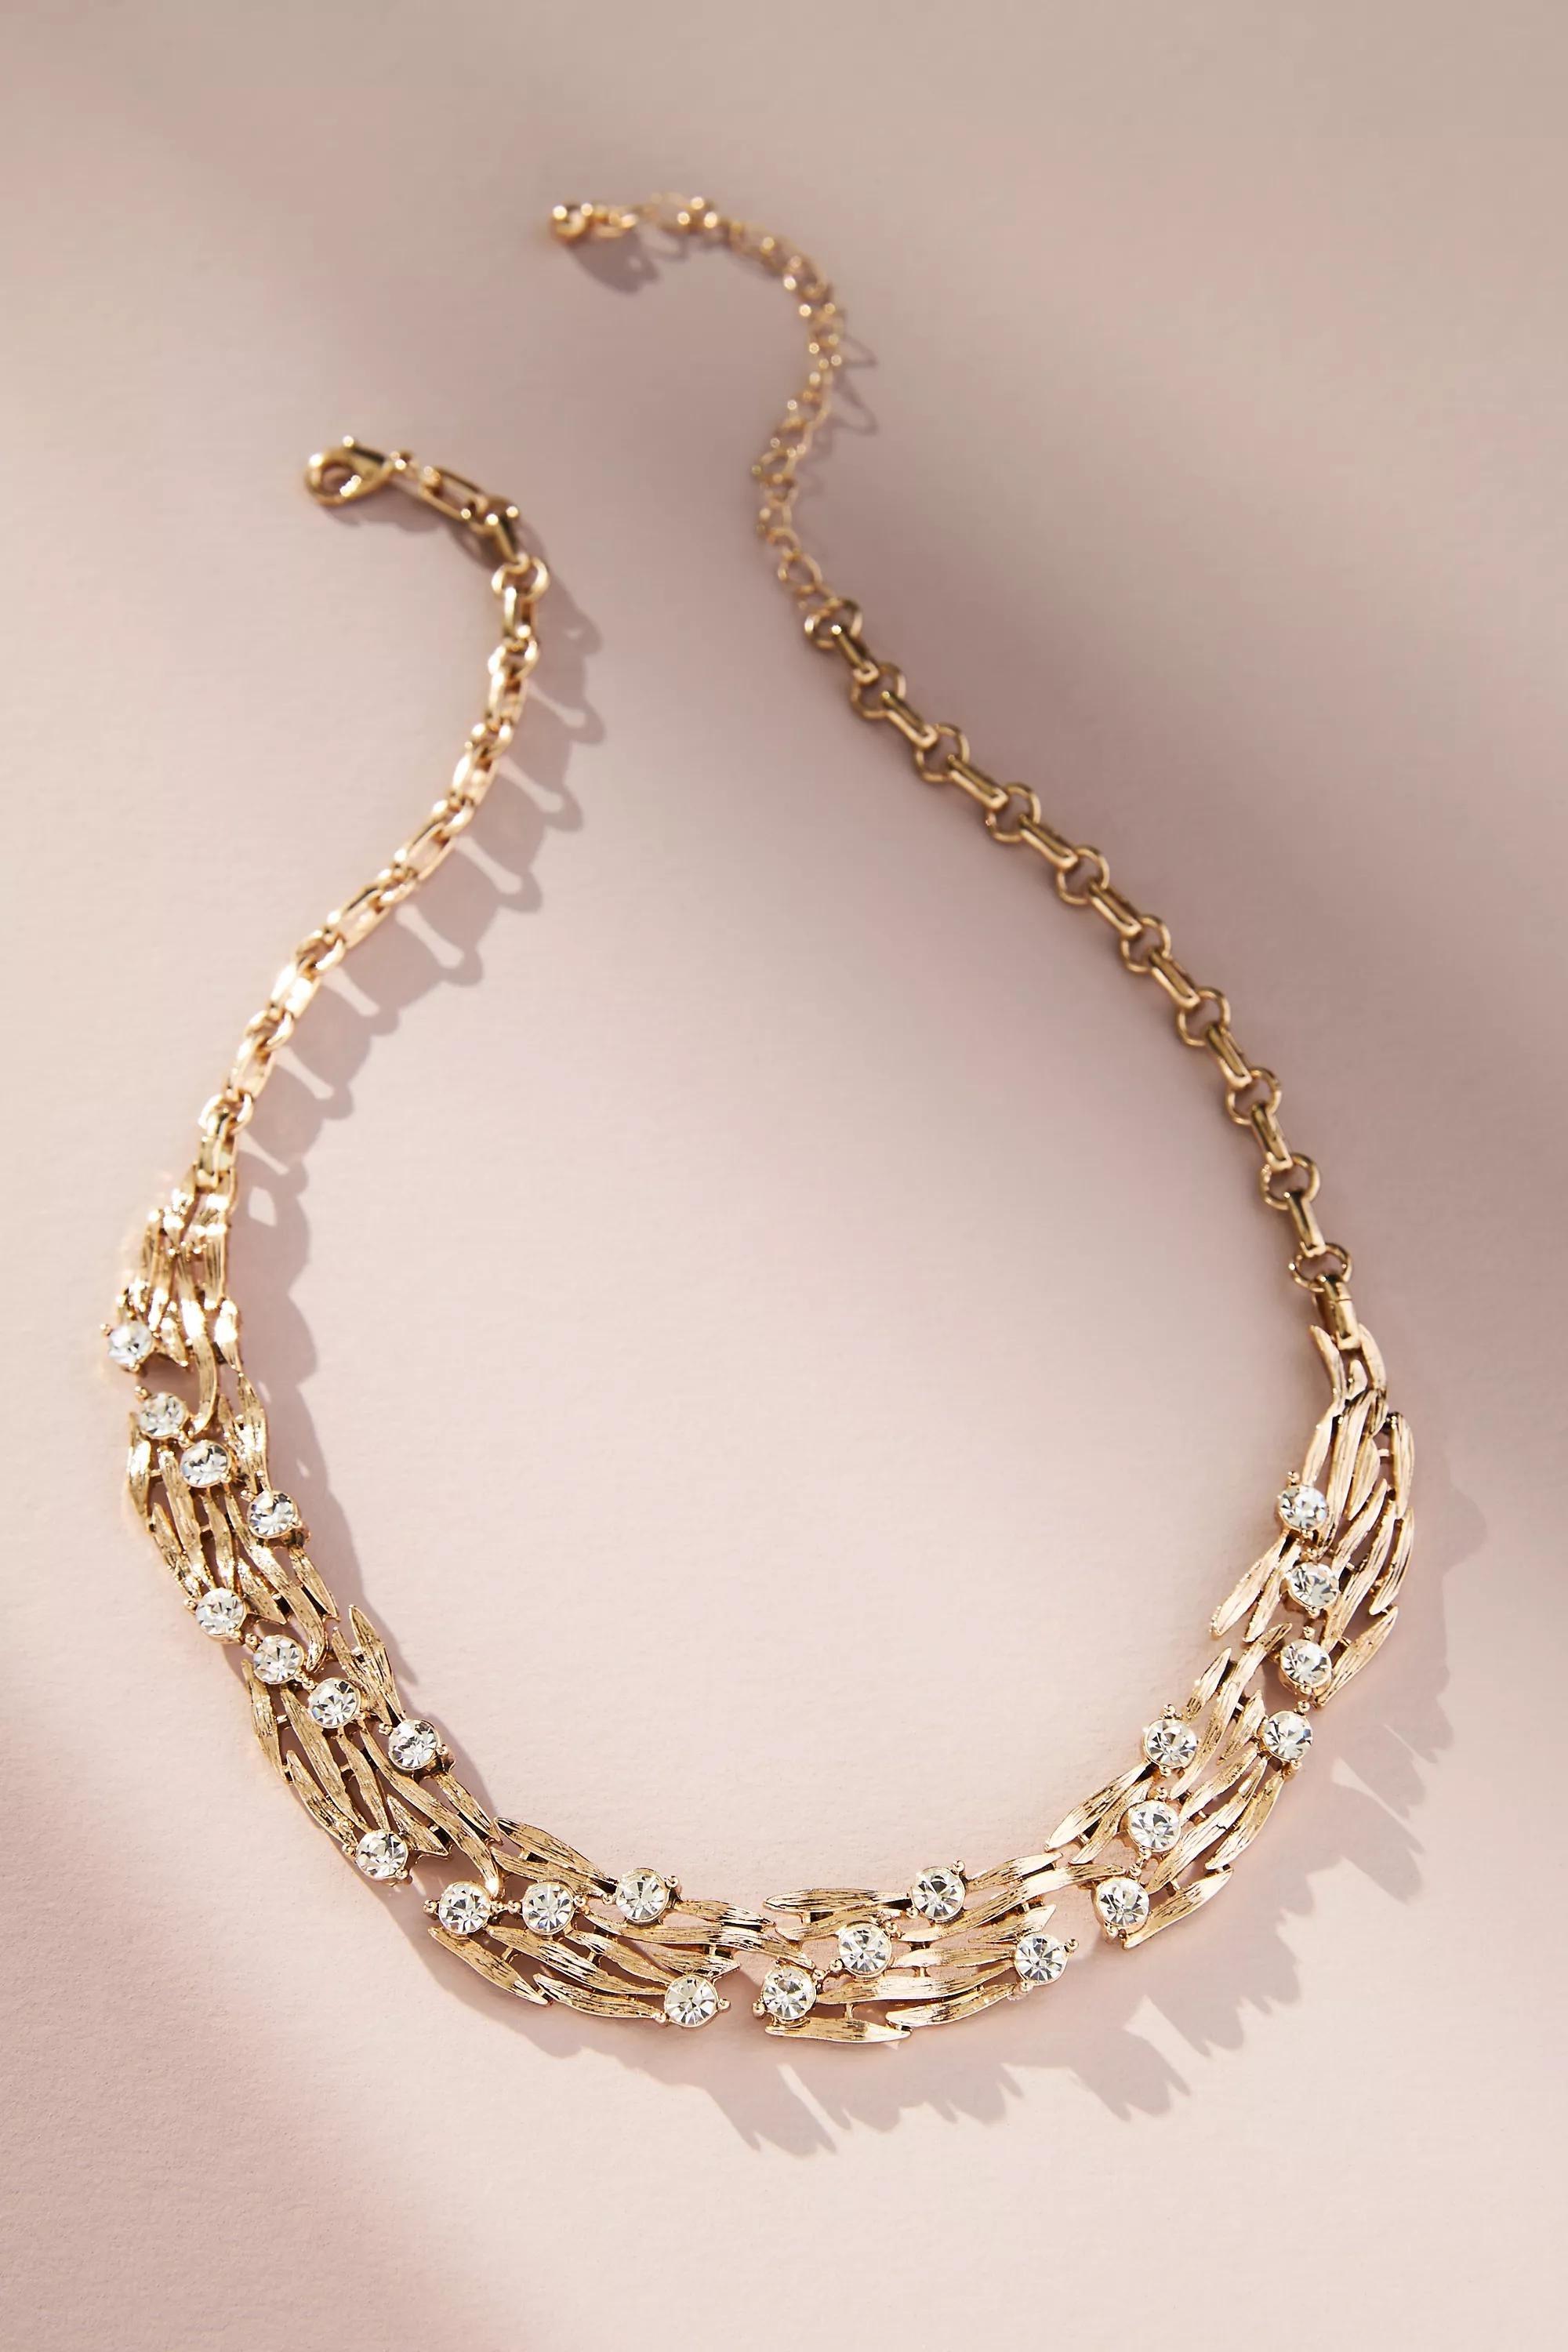 Anthropologie - Gold Crystal Collar Necklace